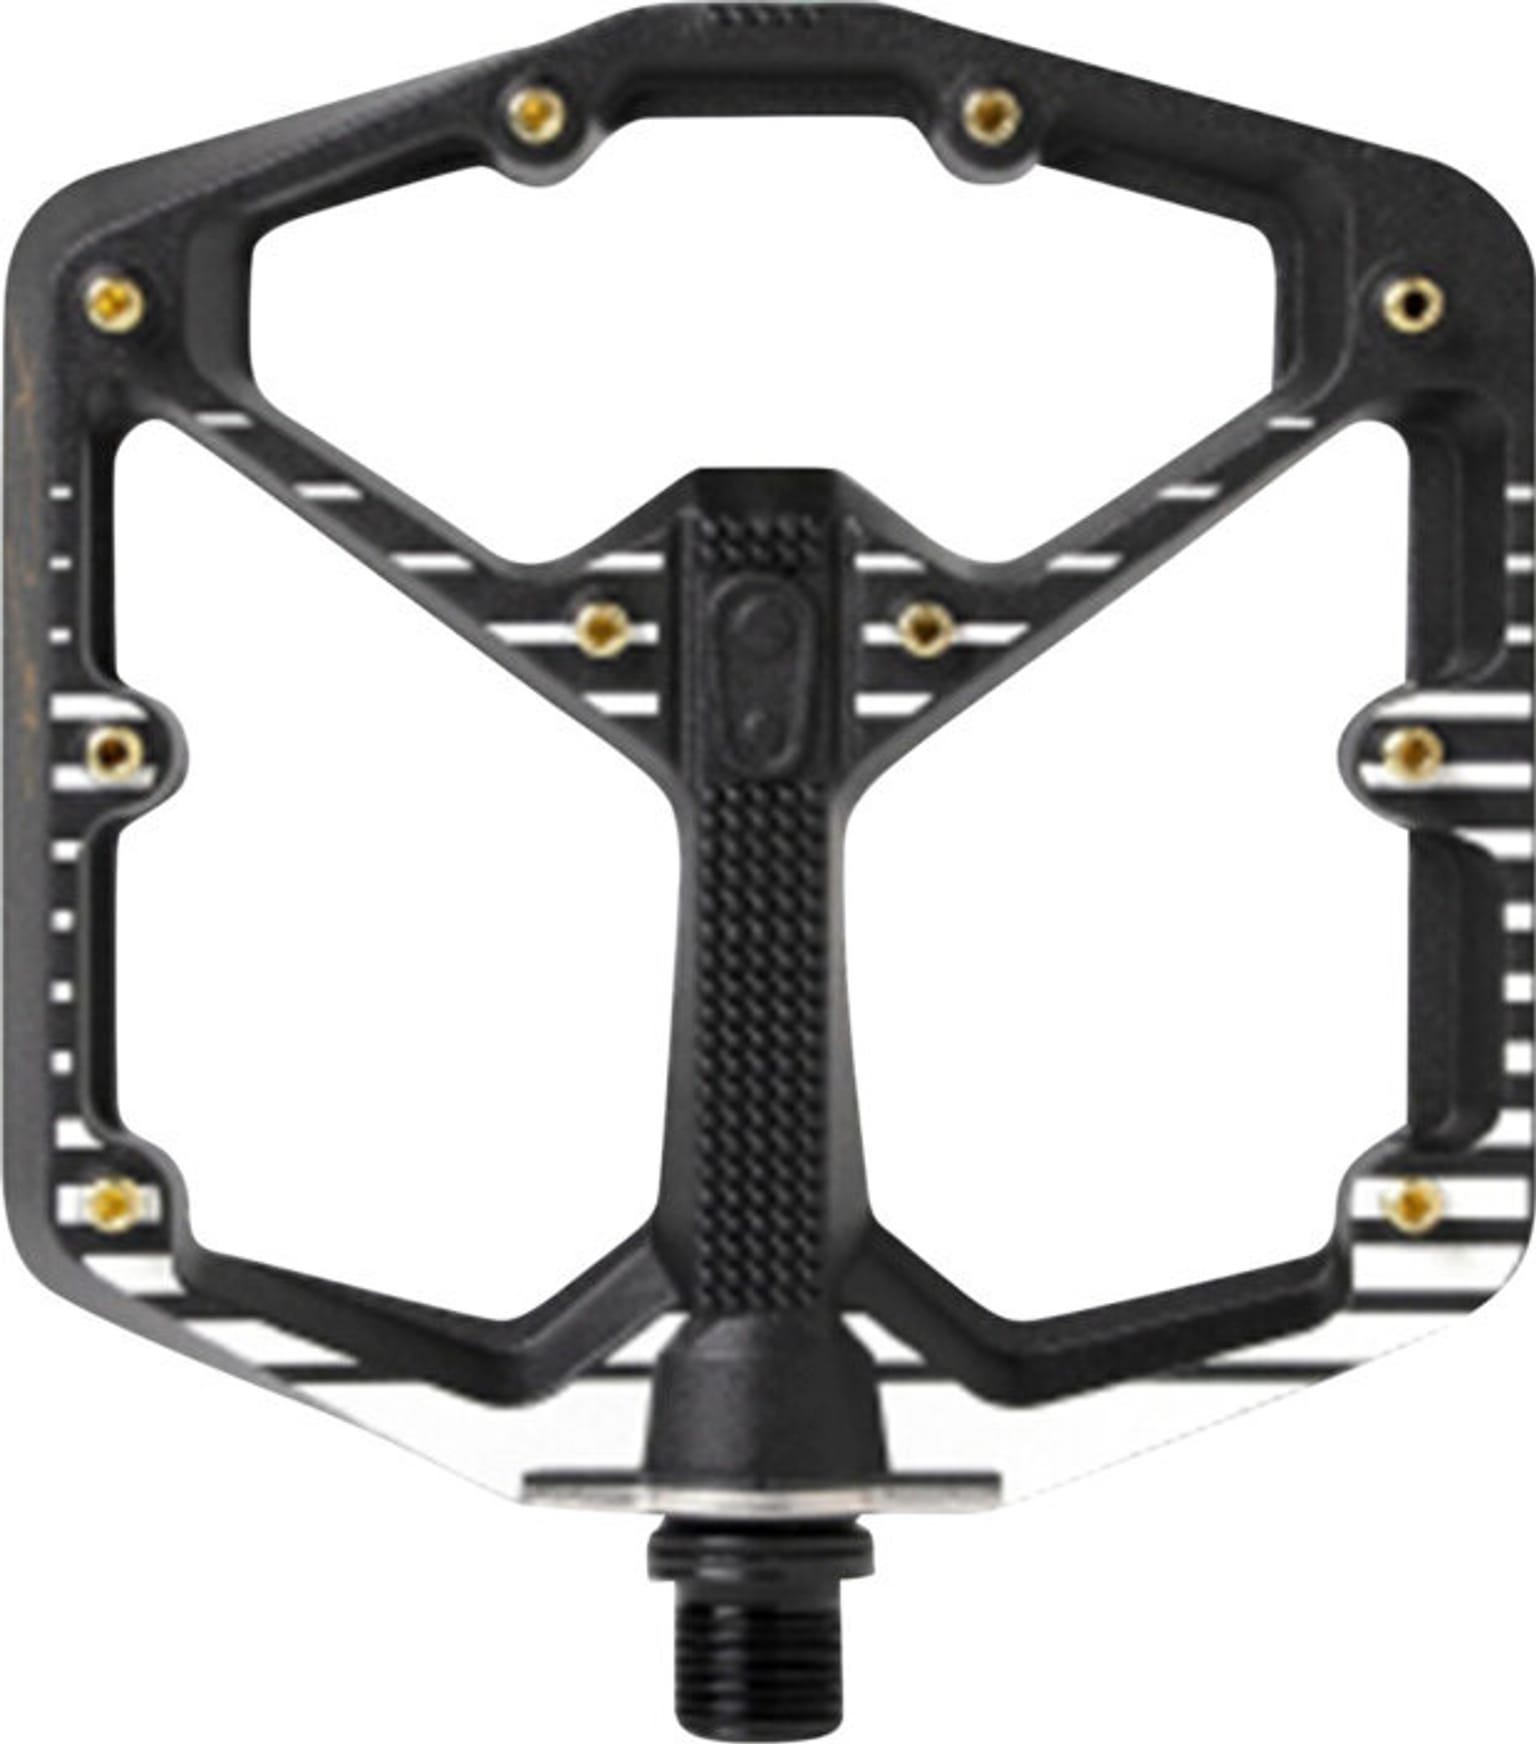 crankbrothers crankbrothers Pedal Stamp 7 large Fabio Wibmer Signature Edition Pedale nero 2